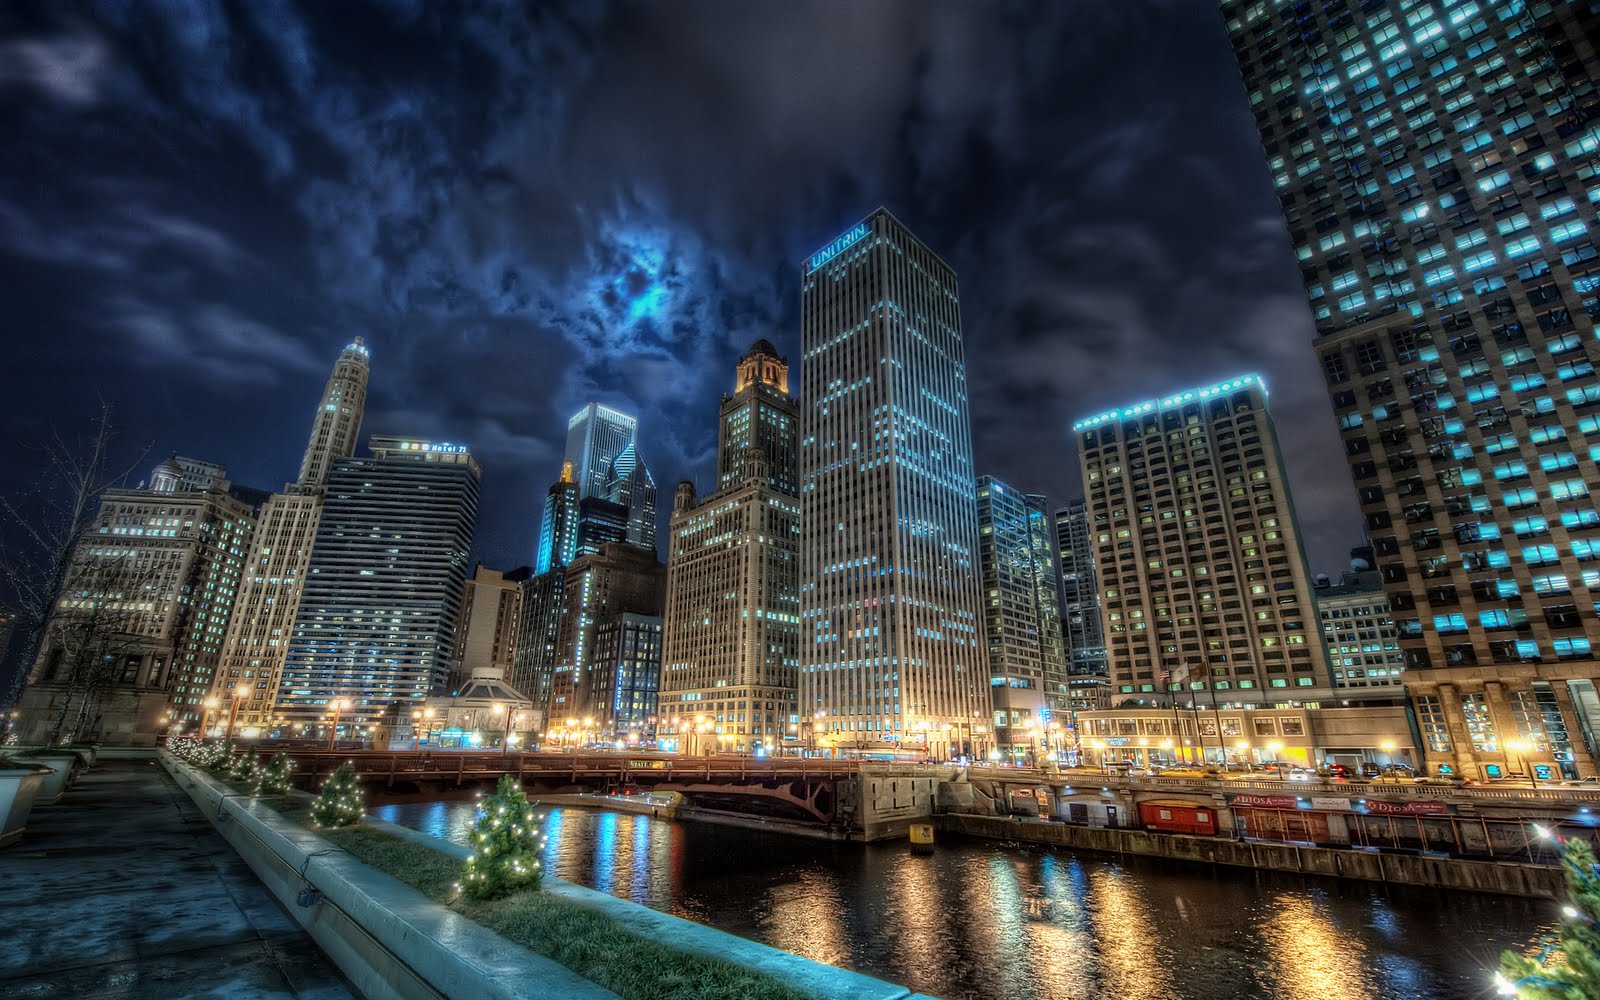 A cityscape at night with the river in the foreground - Chicago